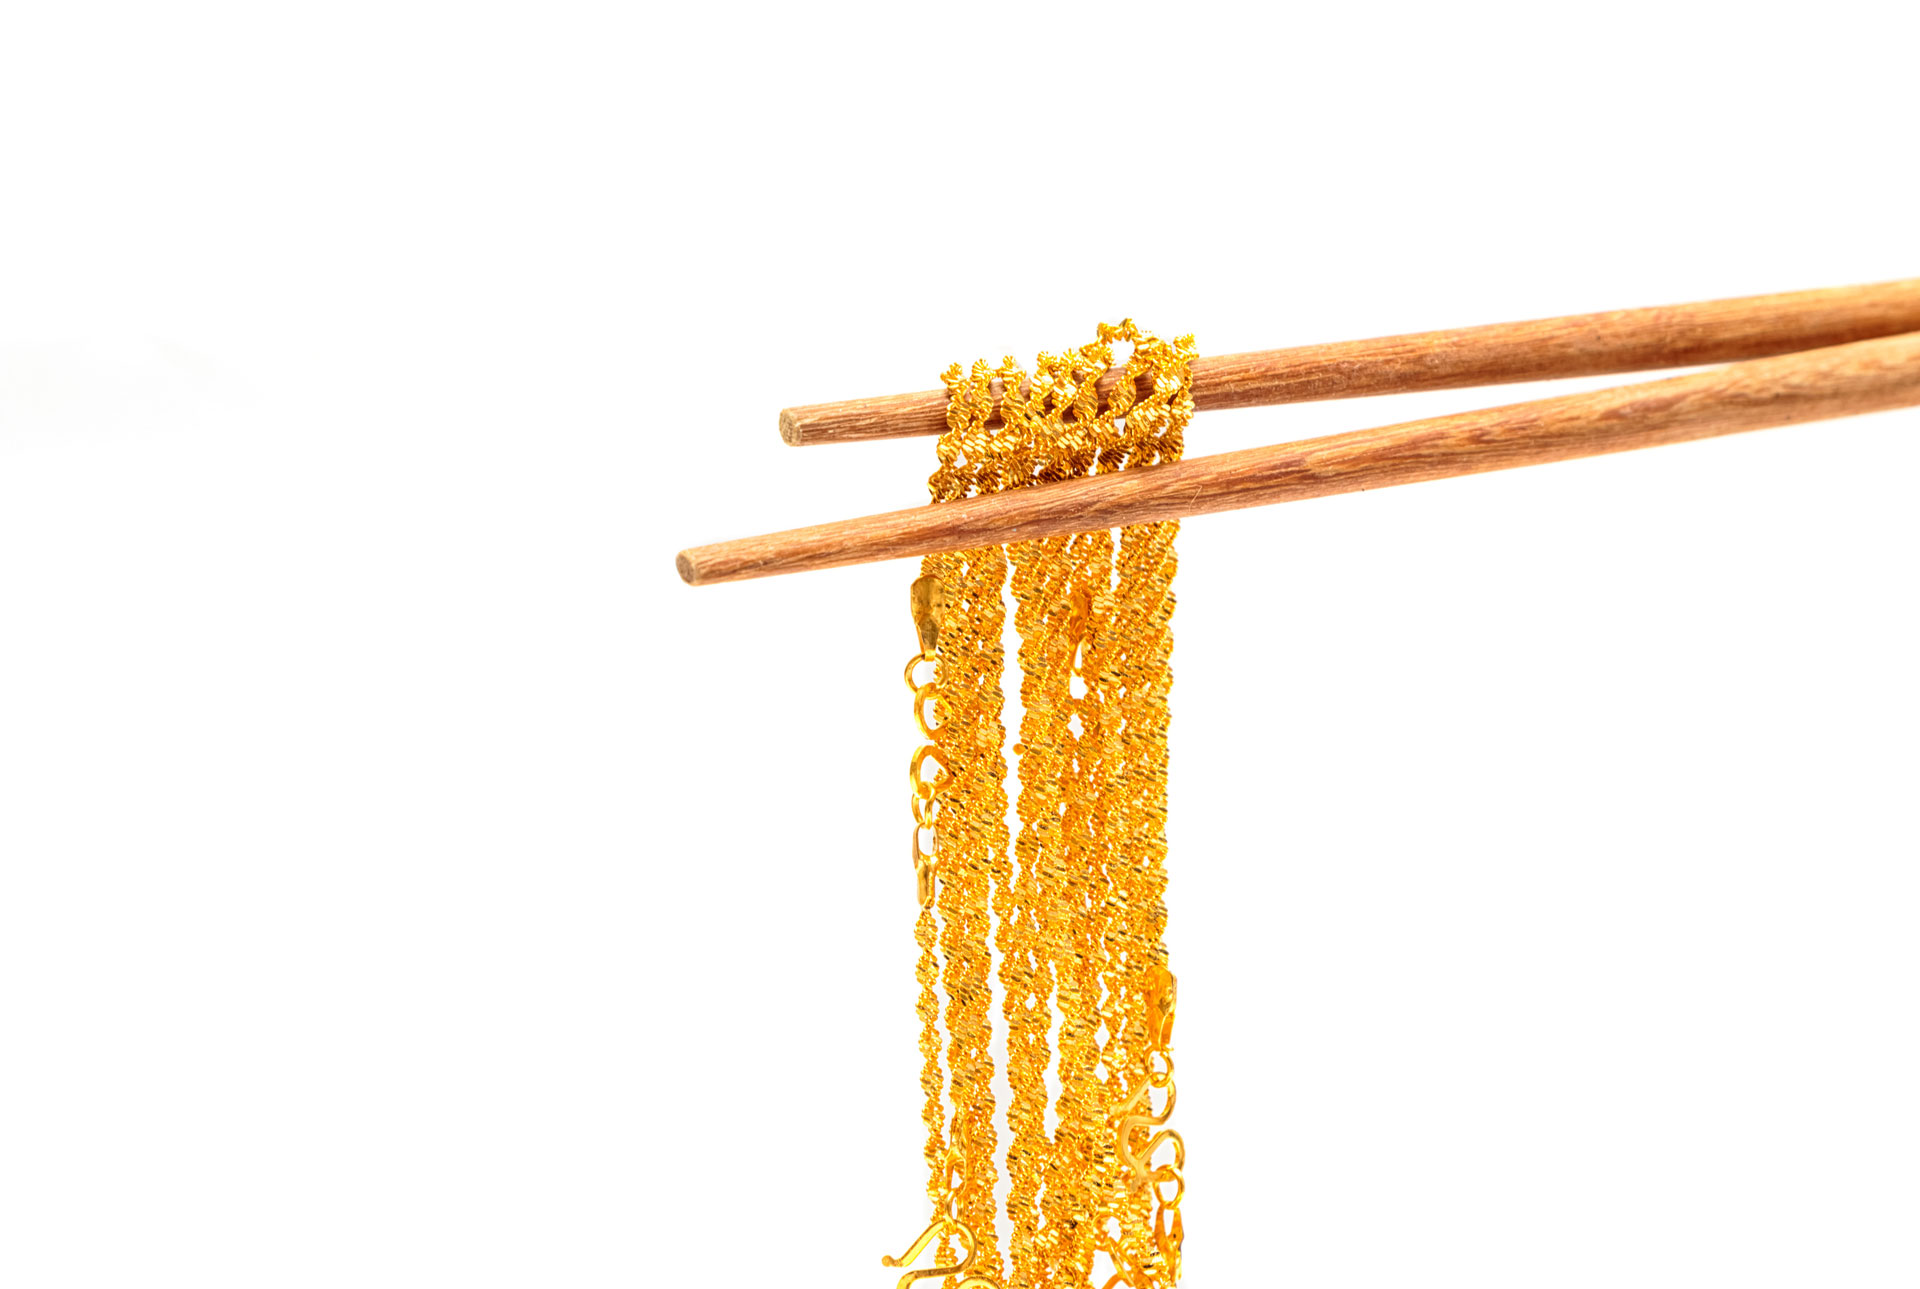 Gold necklace picked up with chopsticks